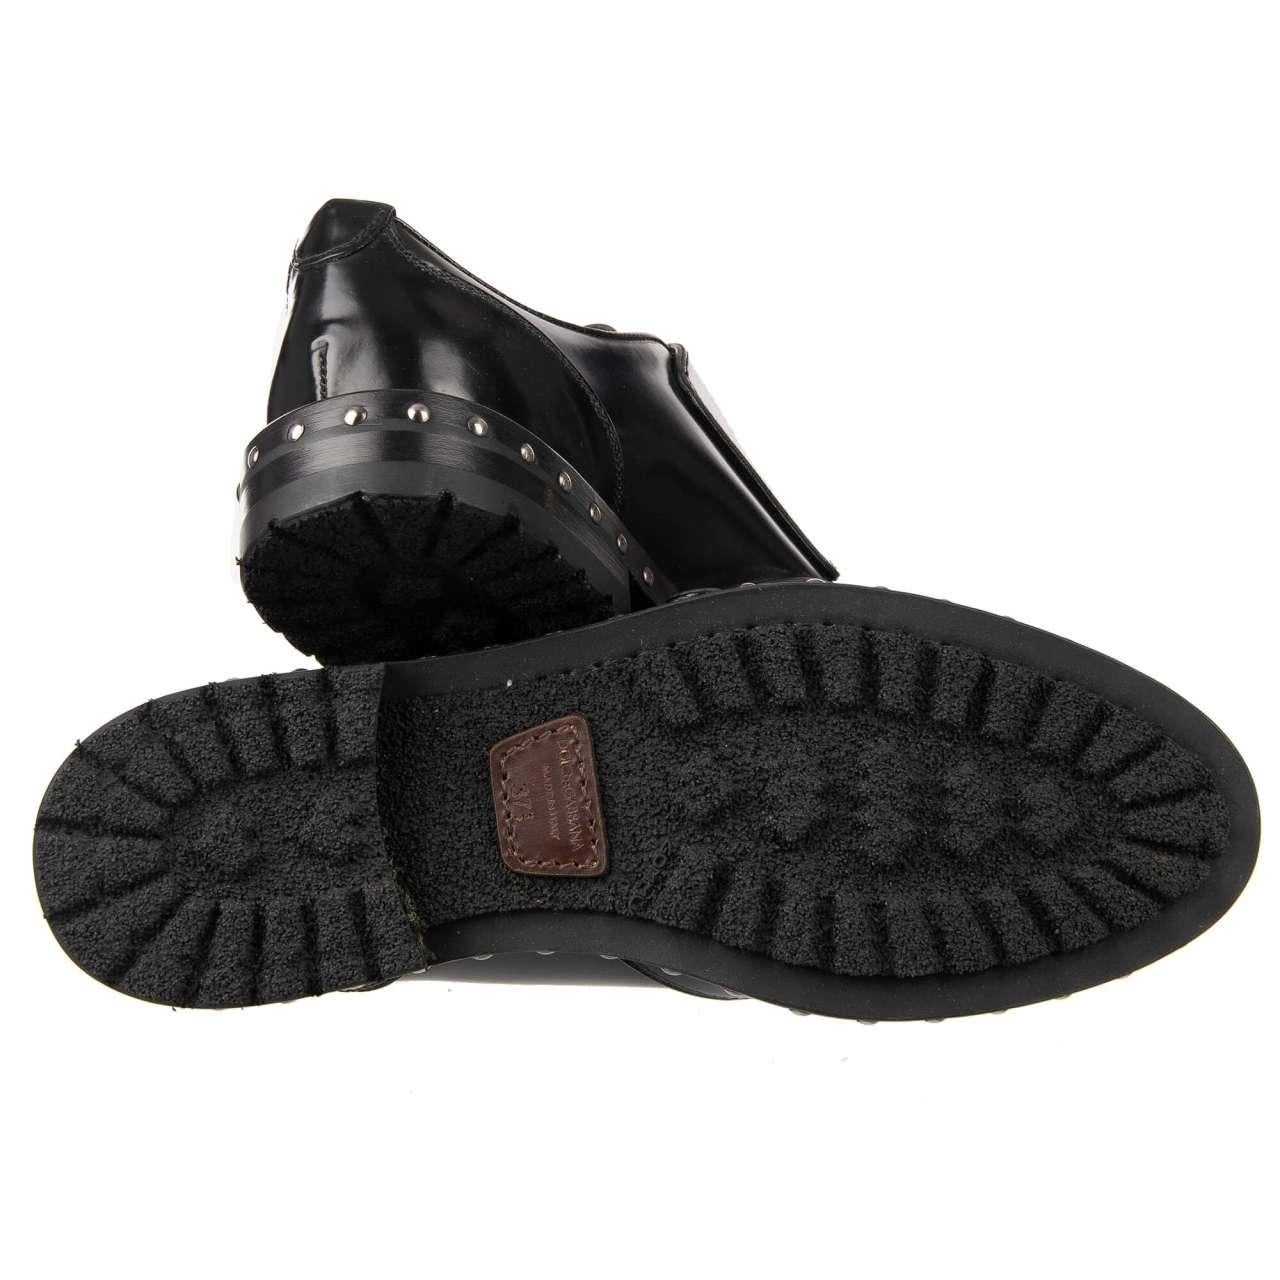 Dolce & Gabbana - Studded Shoes Boots BOY with monk straps Black EUR 40 For Sale 2